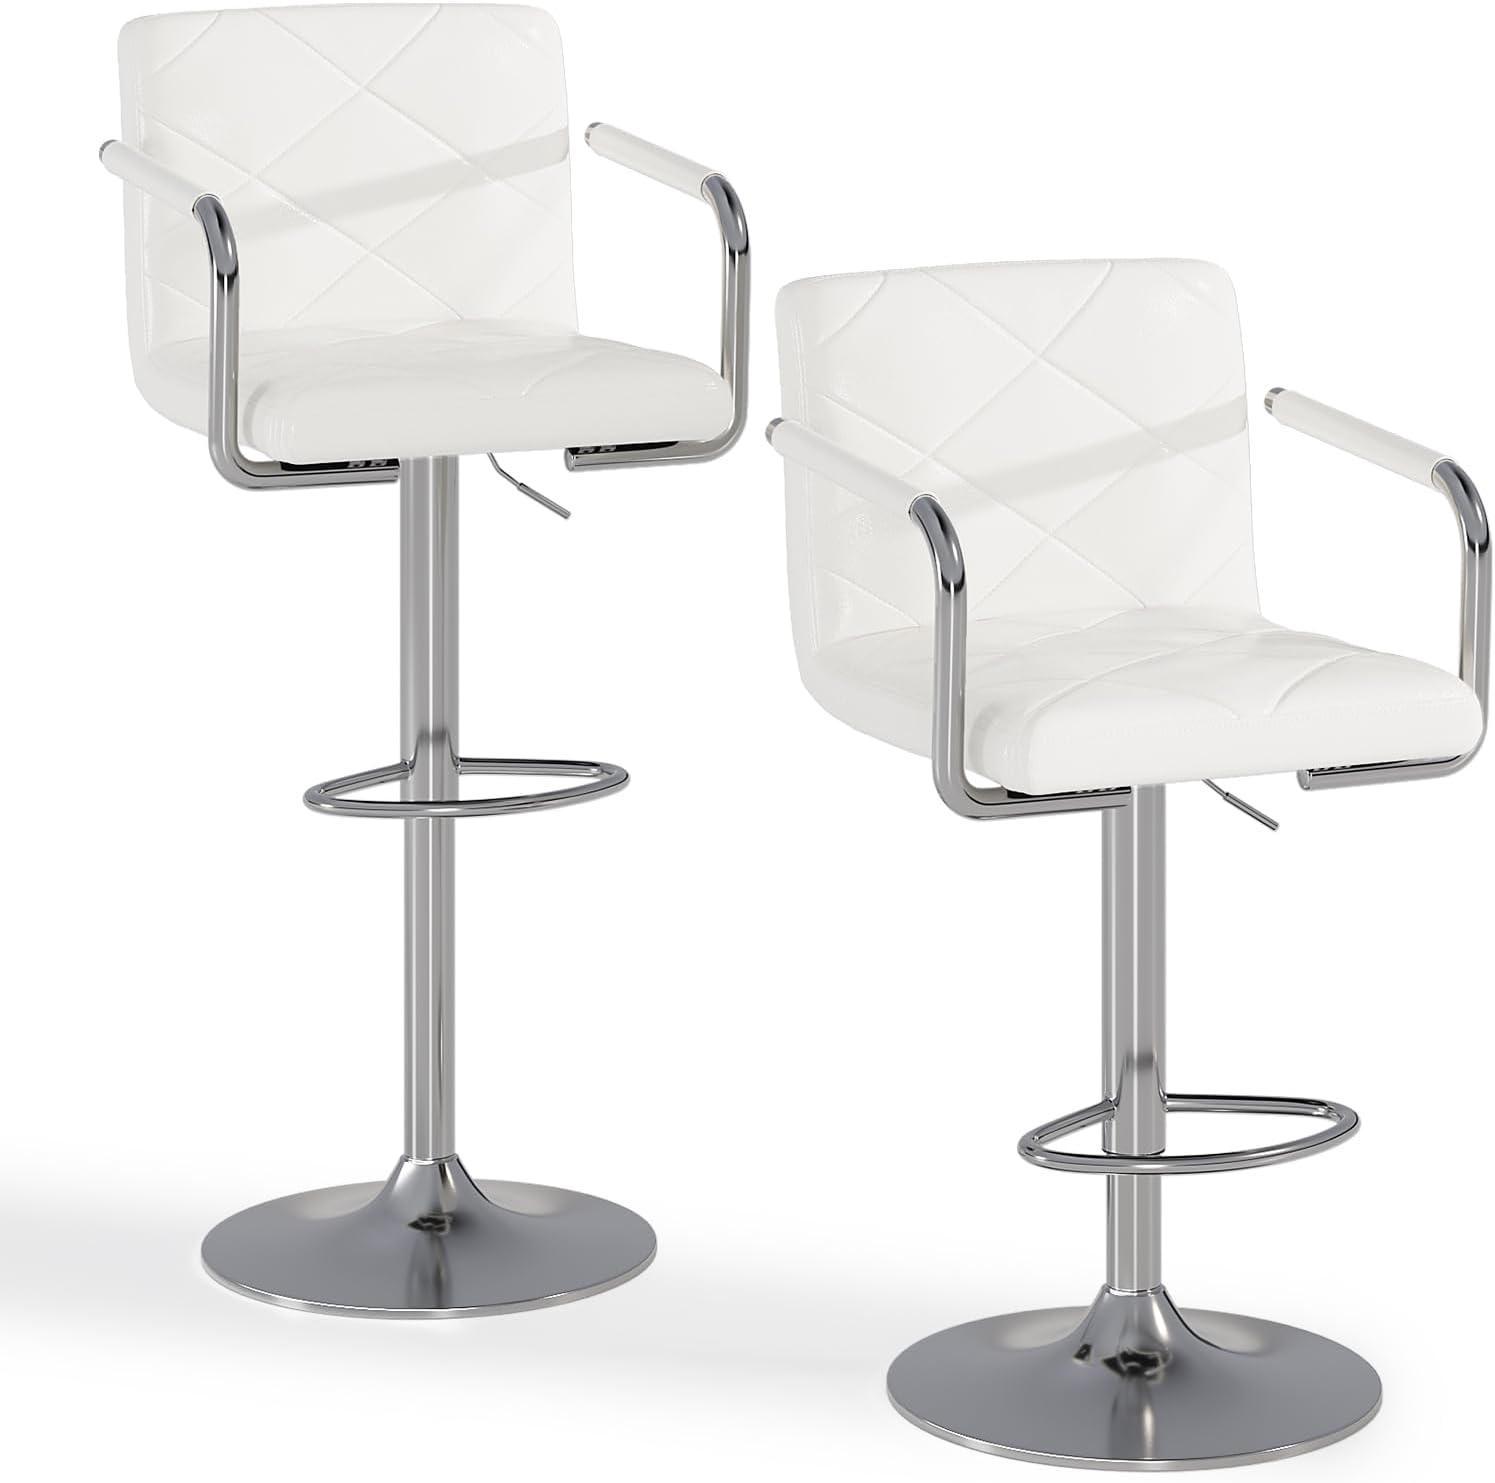 Gizoon TB10 Adjustable Counter Bar Chairs Set for 2